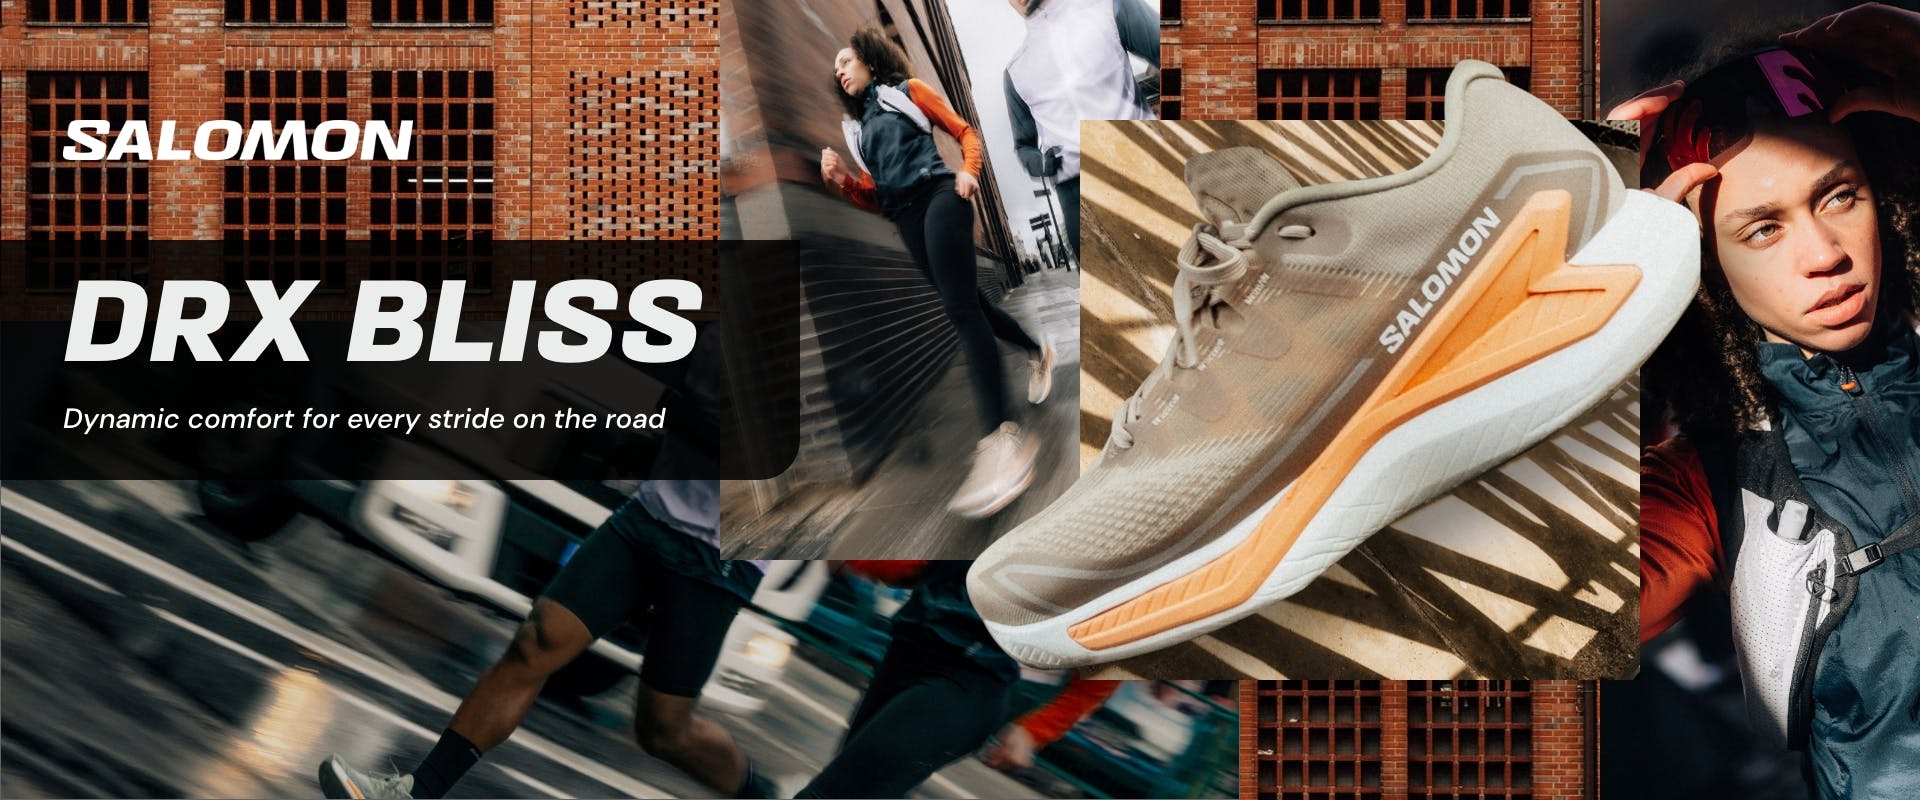 DRX Bliss Dynamic comfort for every stride on the road